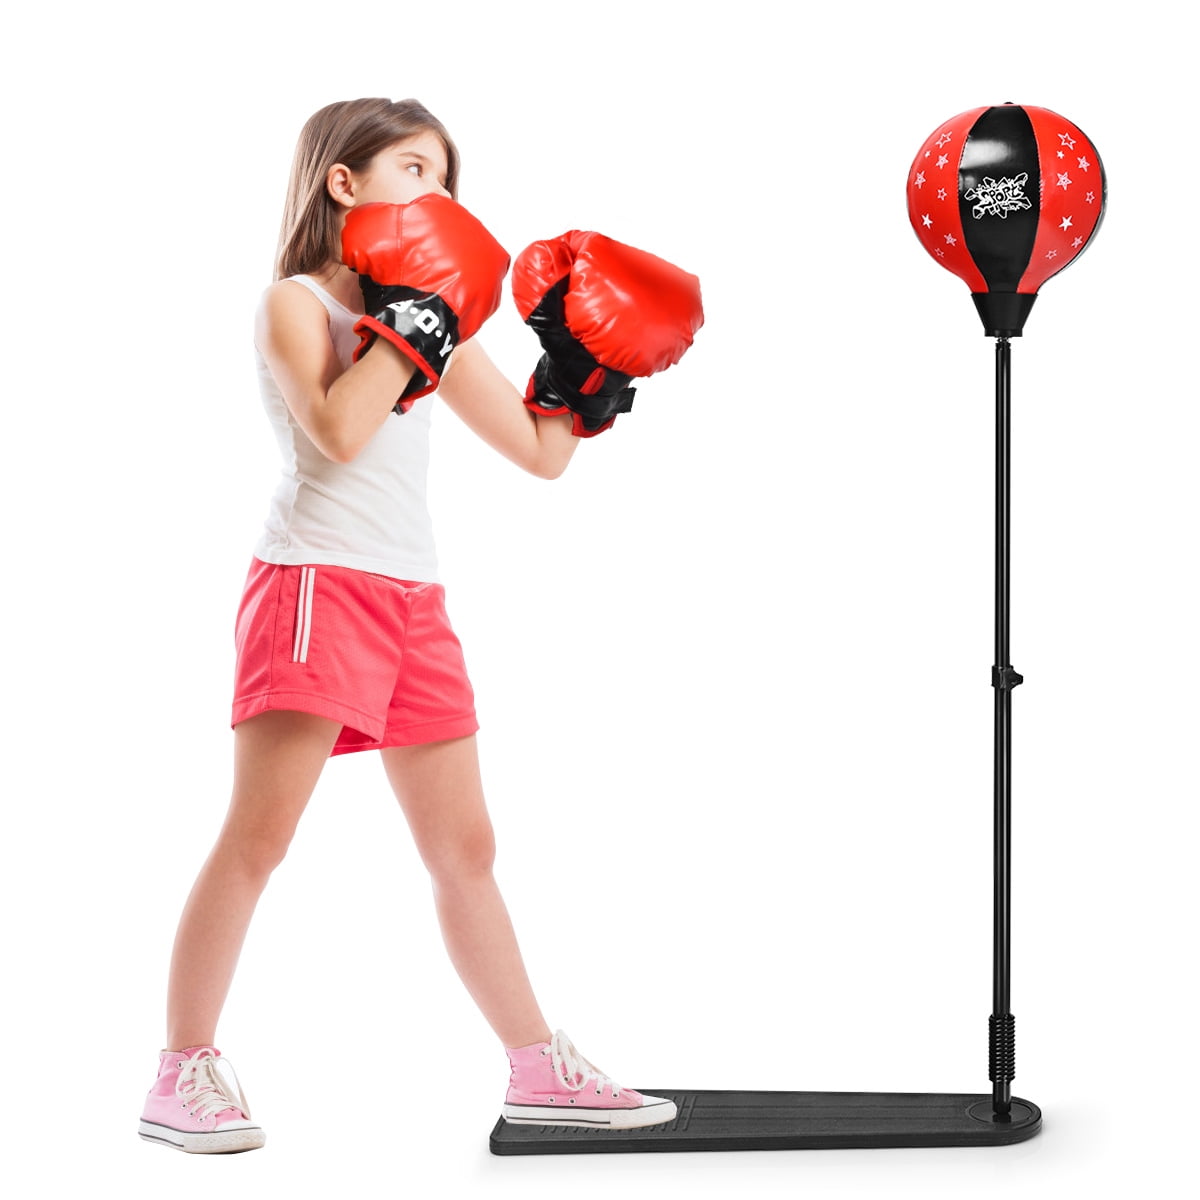 Kids Boxing Ball Set with Punching Bag Boxing Gloves Hand Pump & Adjustable Stan 